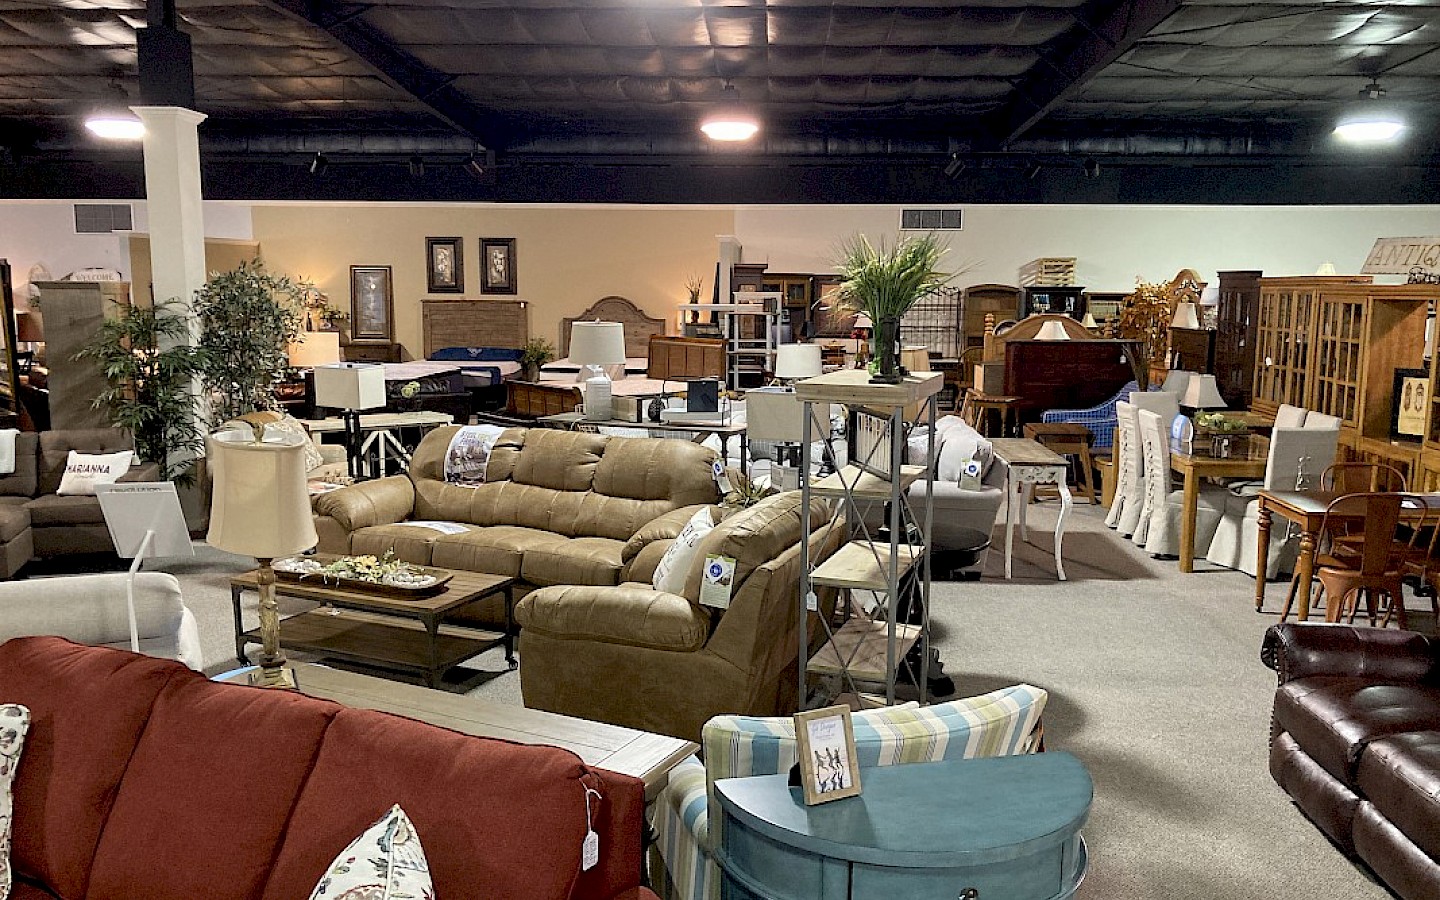 inside showroom with couches, recliners, beds